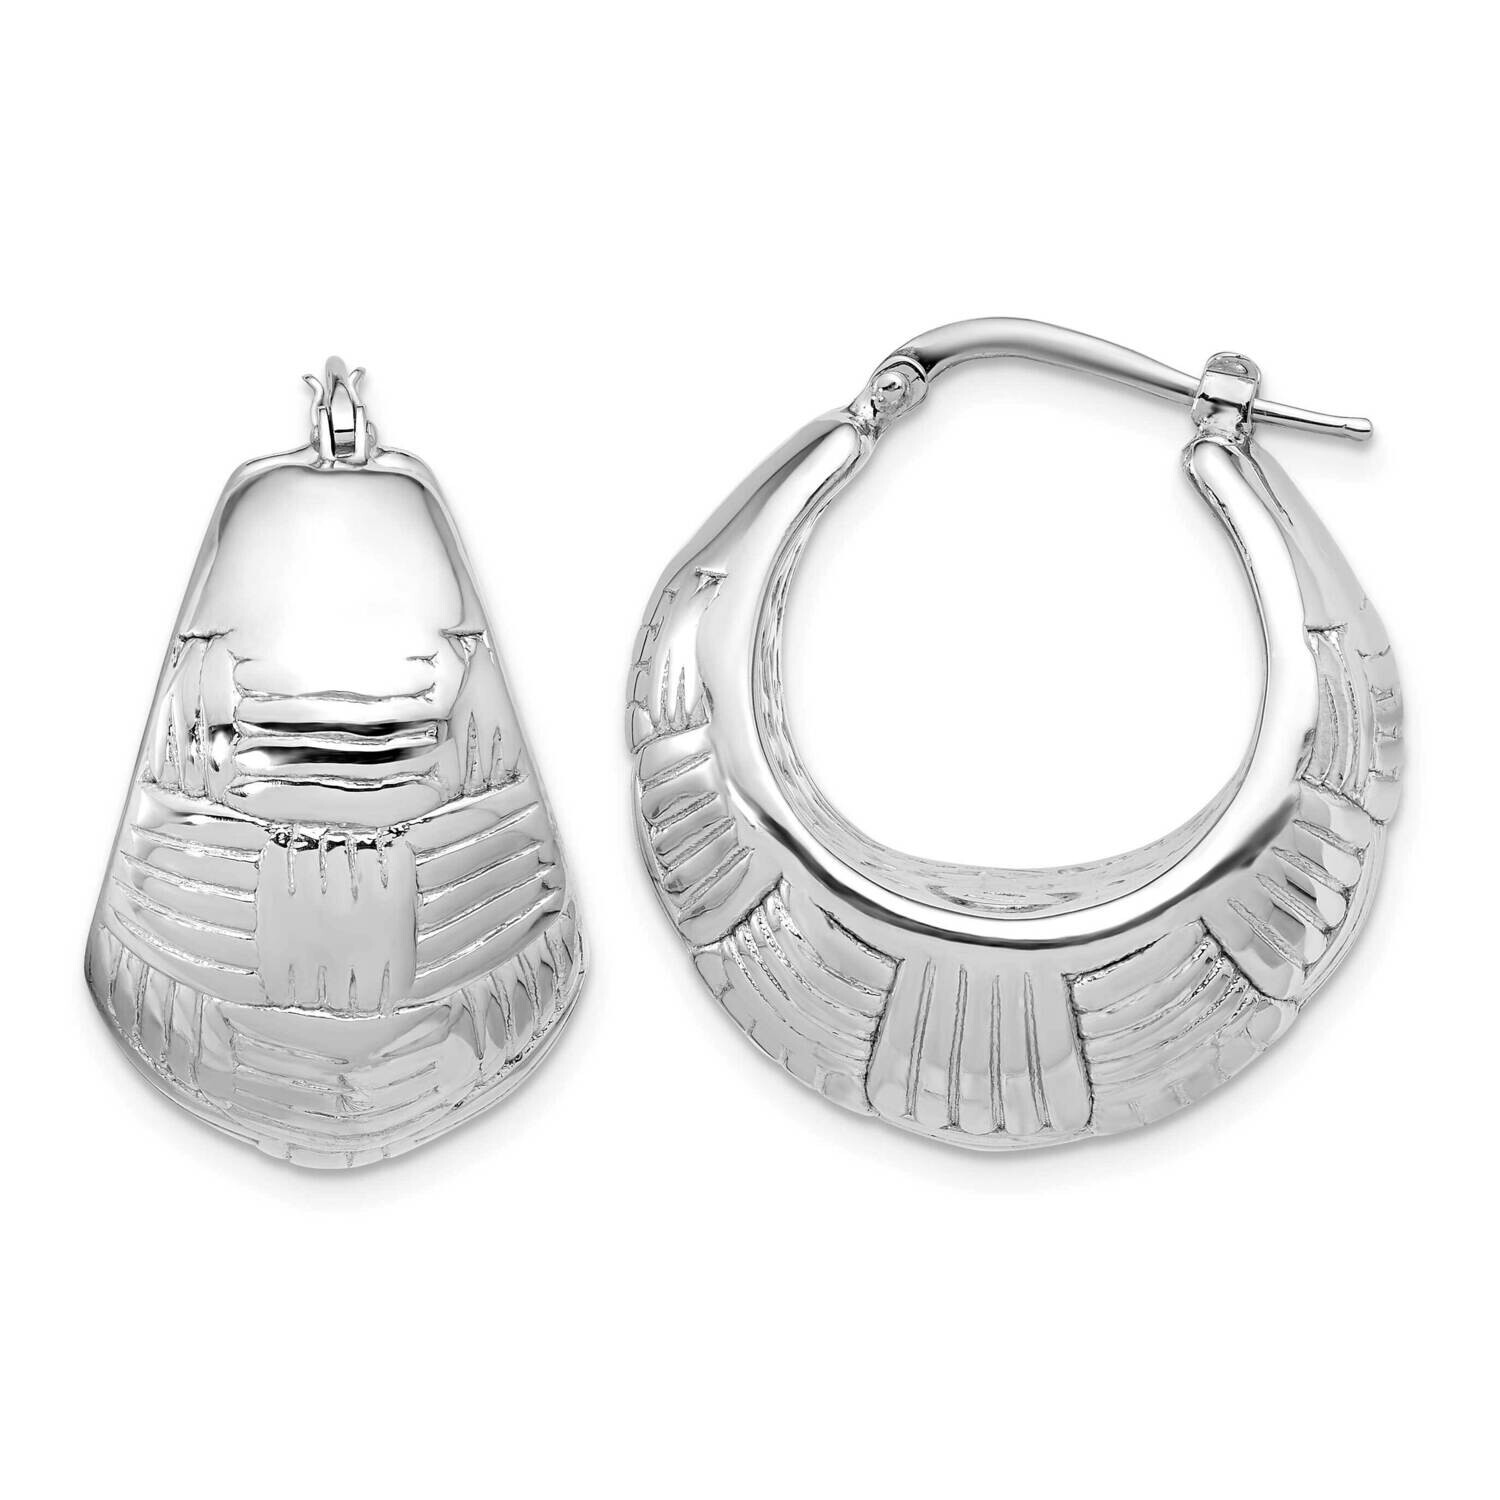 Rh-Plated Polish Woven Round Shrimp Hoop Earrings Sterling Silver QE16902